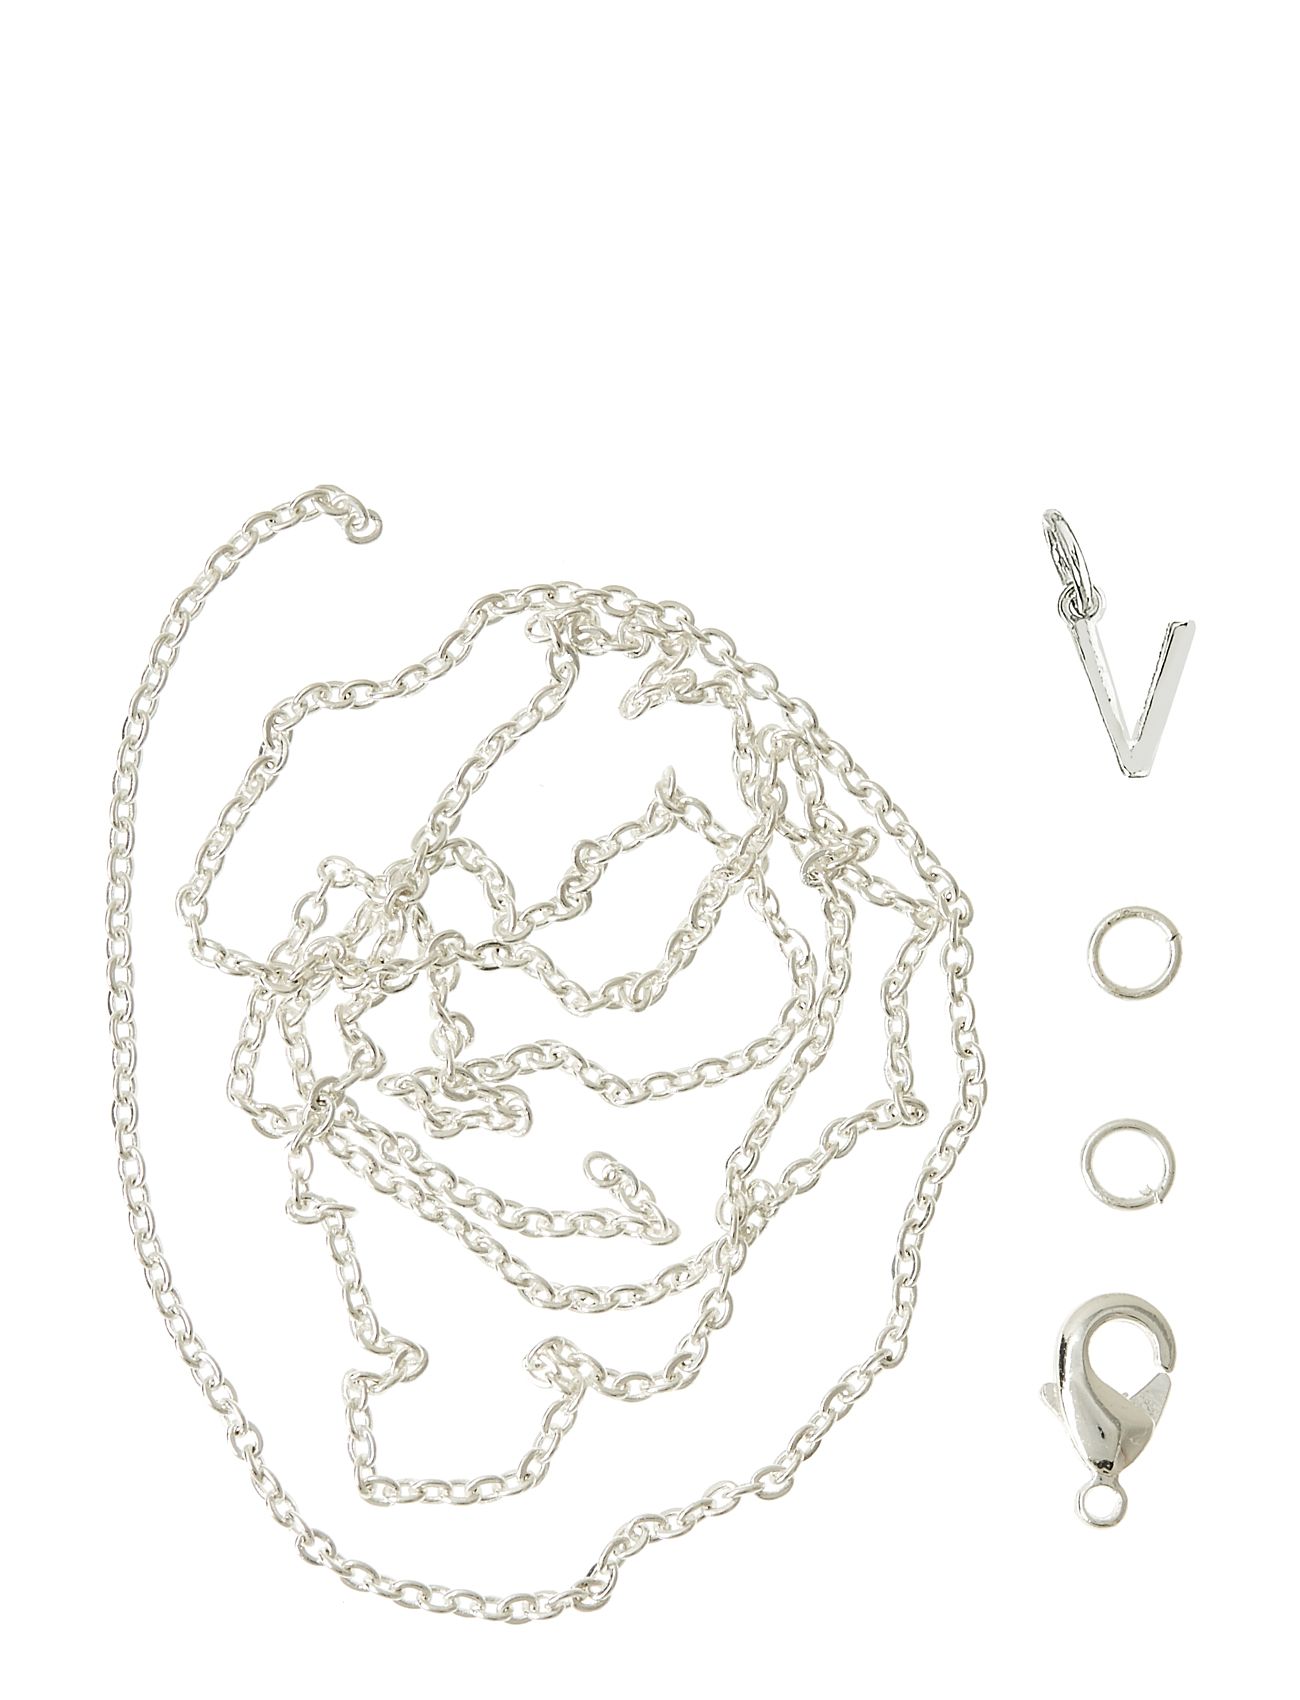 Letter V Sp With O-Ring, Chain And Clasp Toys Creativity Drawing & Crafts Craft Jewellery & Accessories Silver Me & My Box